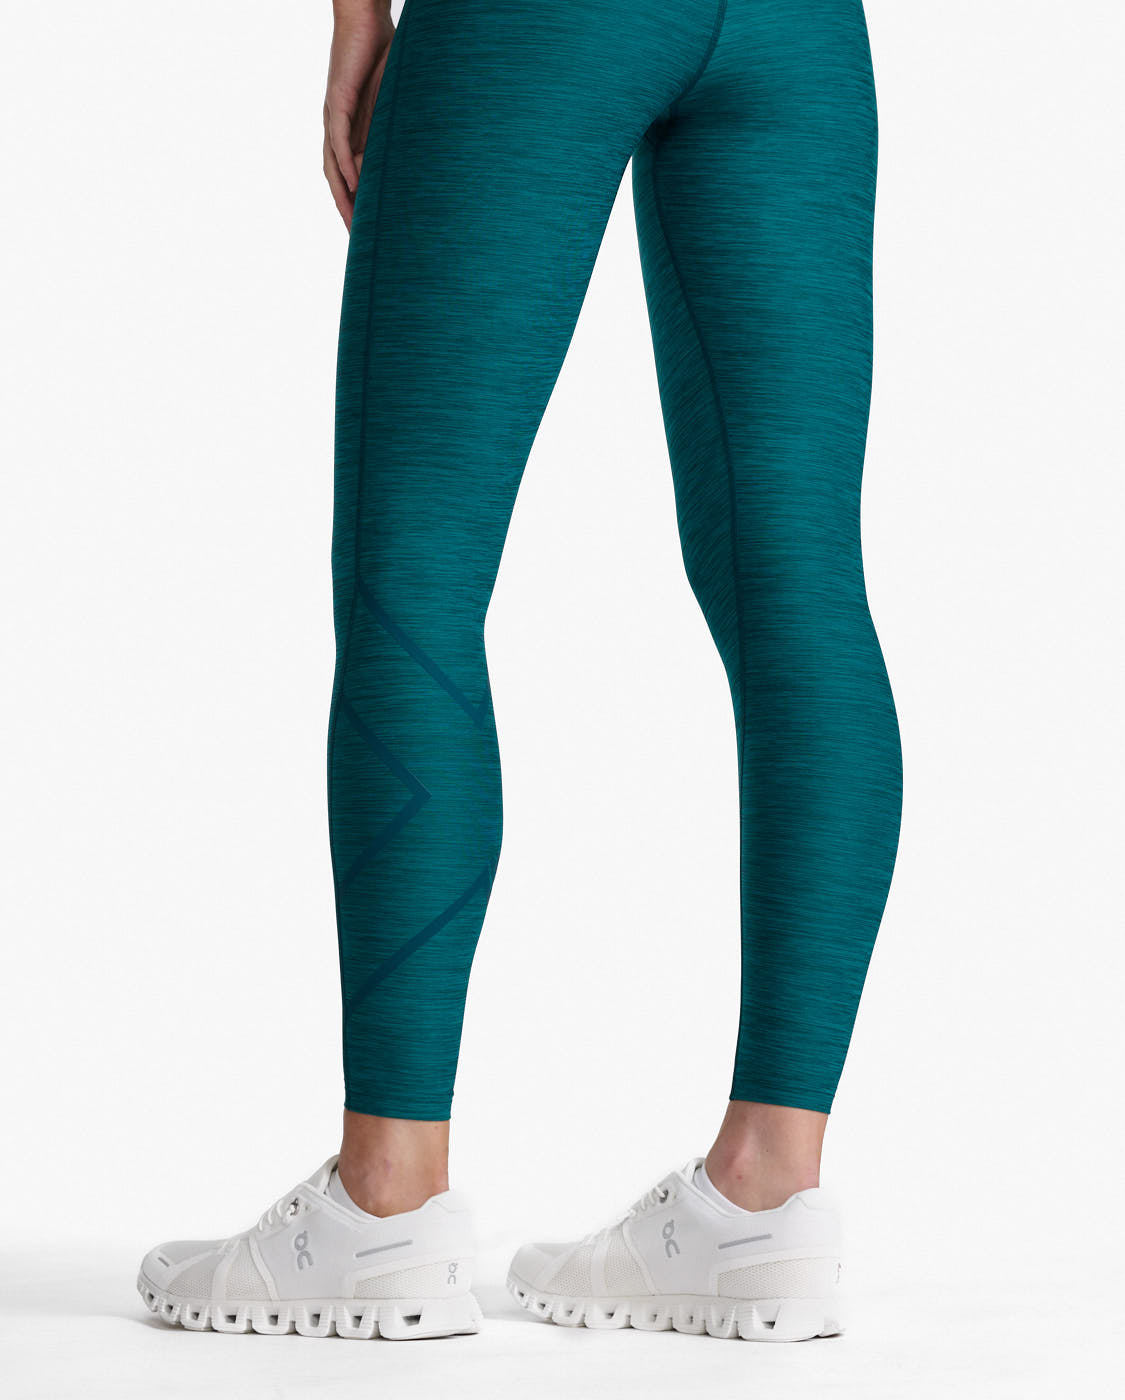 Motion Print Mid-Rise Compression Tights